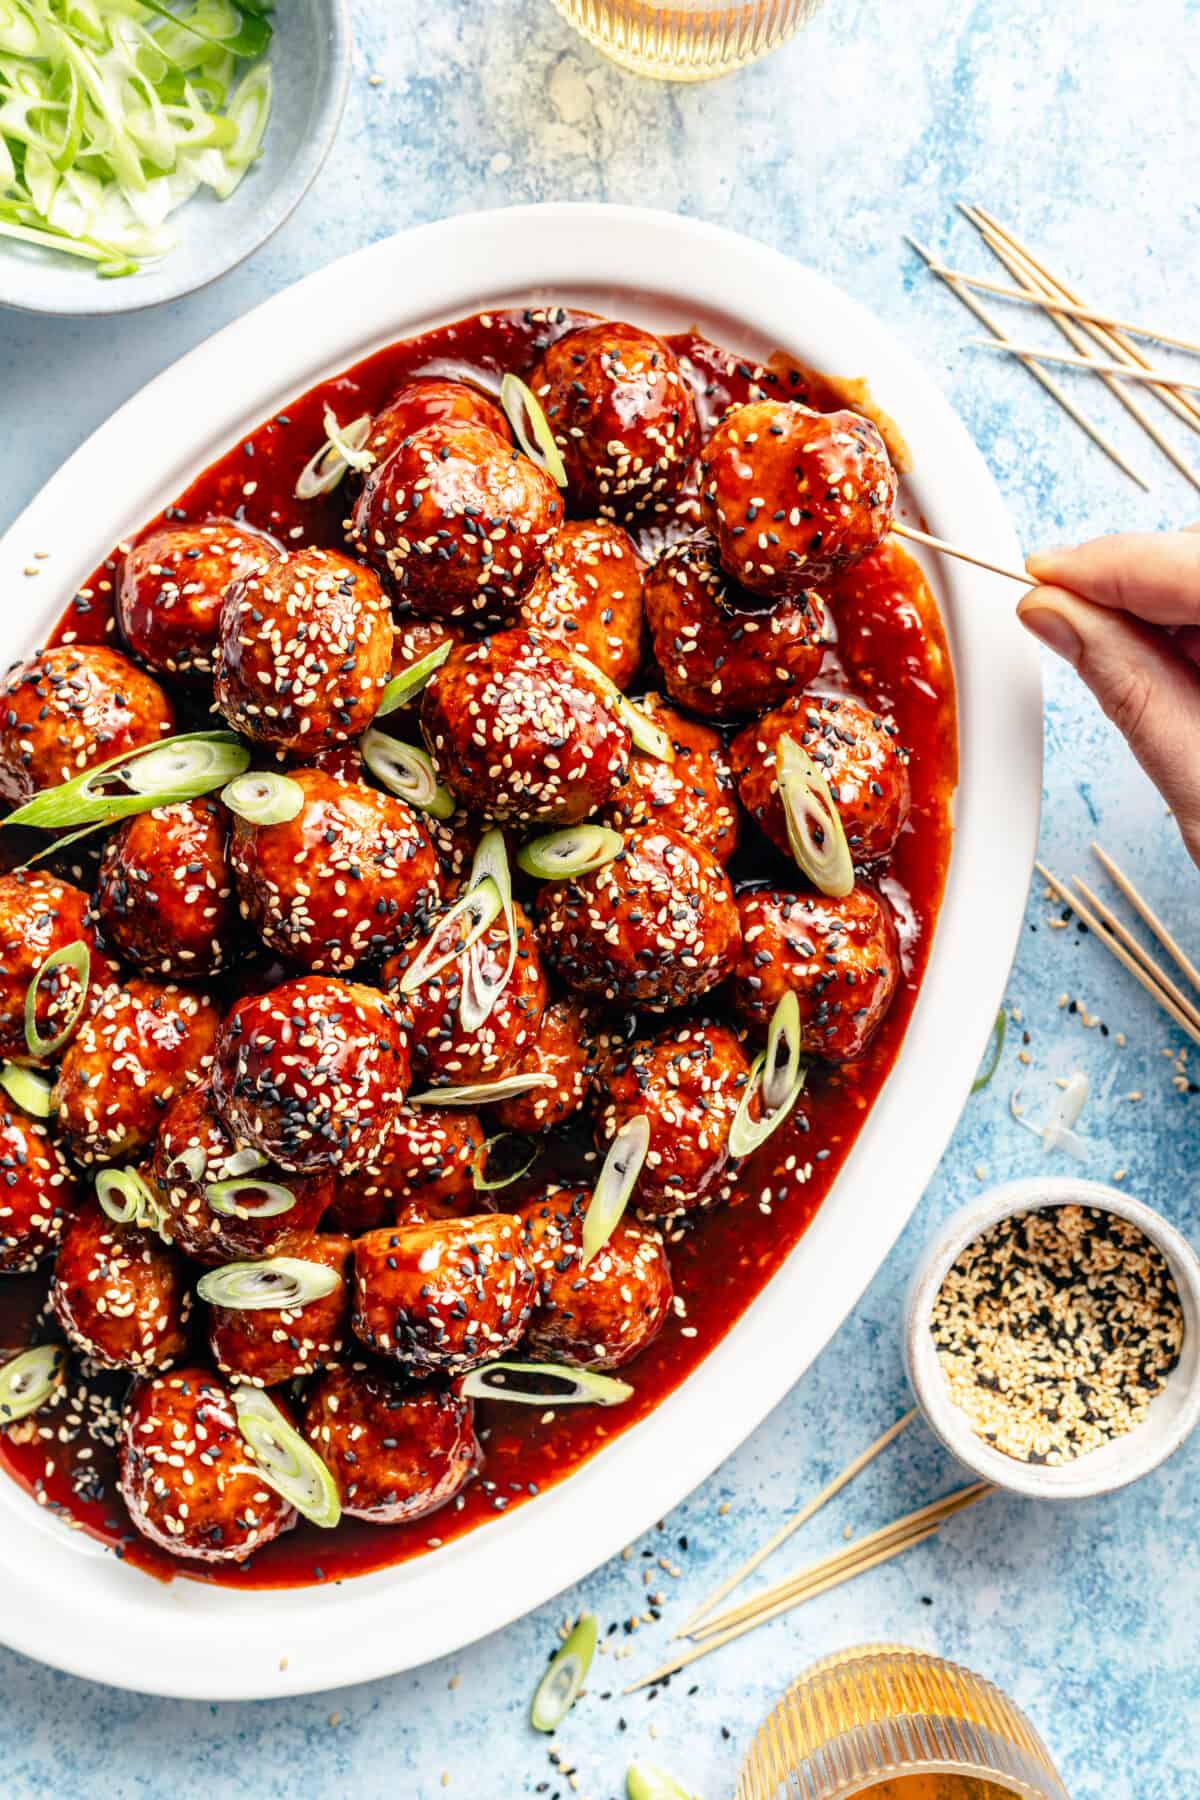 Platter of Korean-Inspired BBQ Chicken Meatballs with hand holding toothpick reaching in.